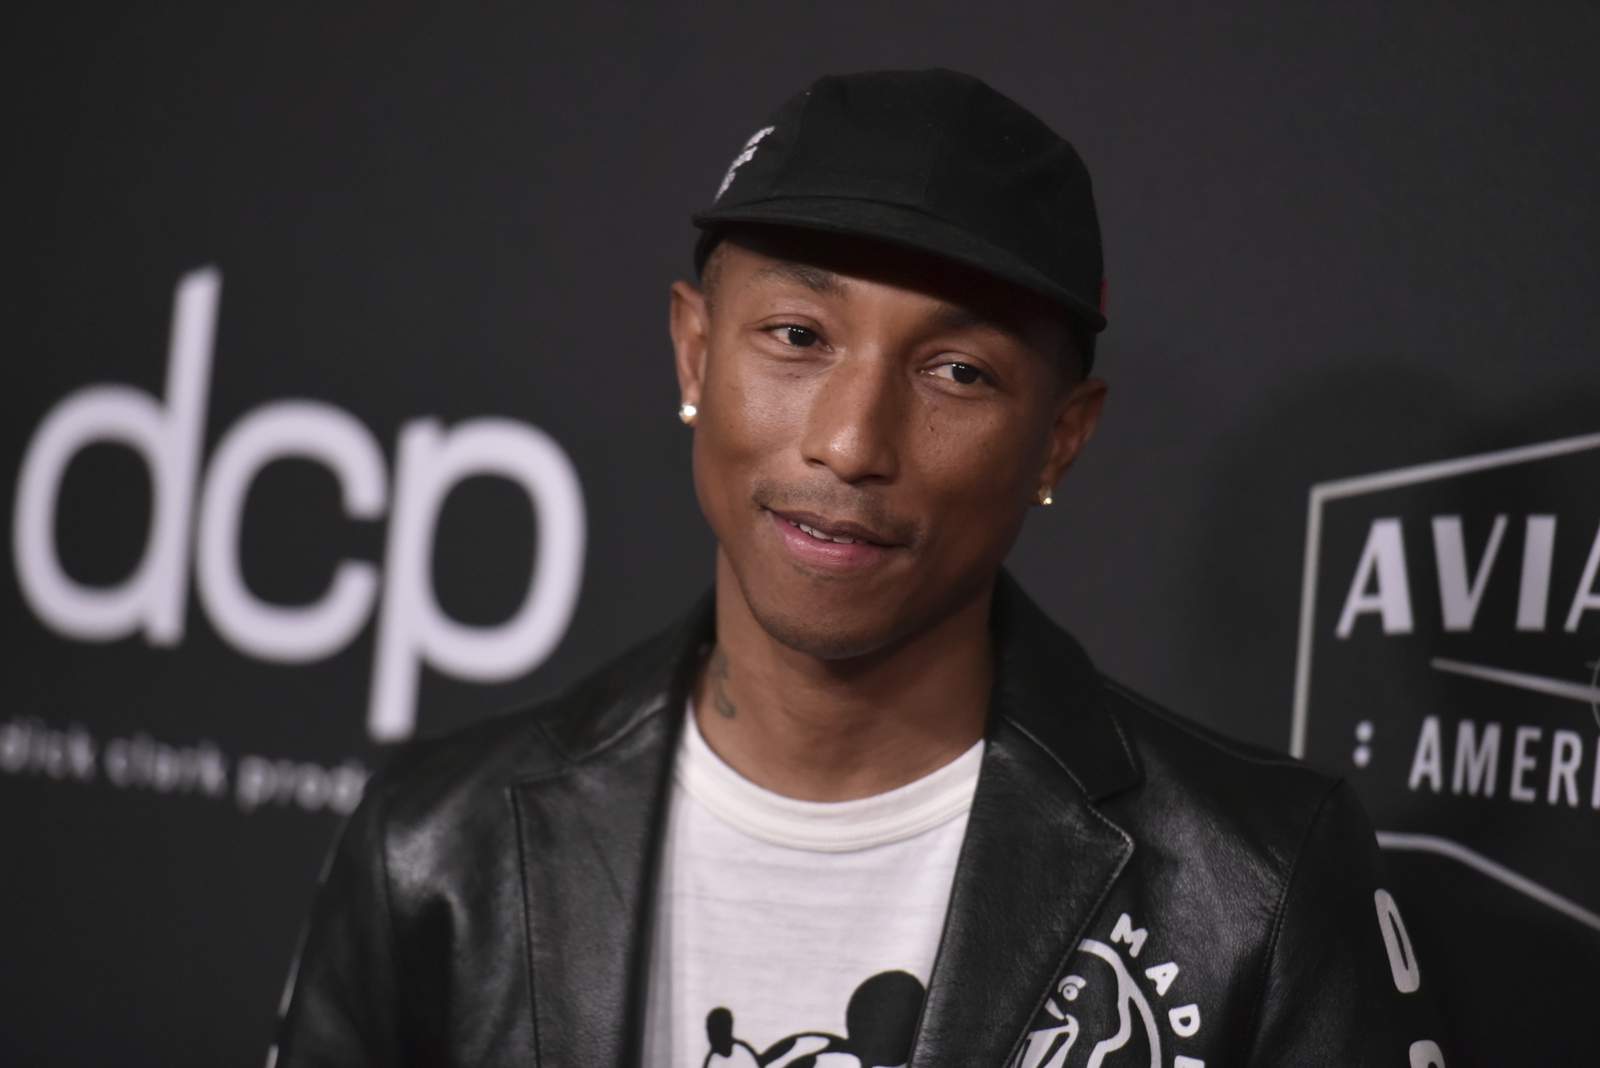 Pharrell wants federal probe into police shooting of cousin